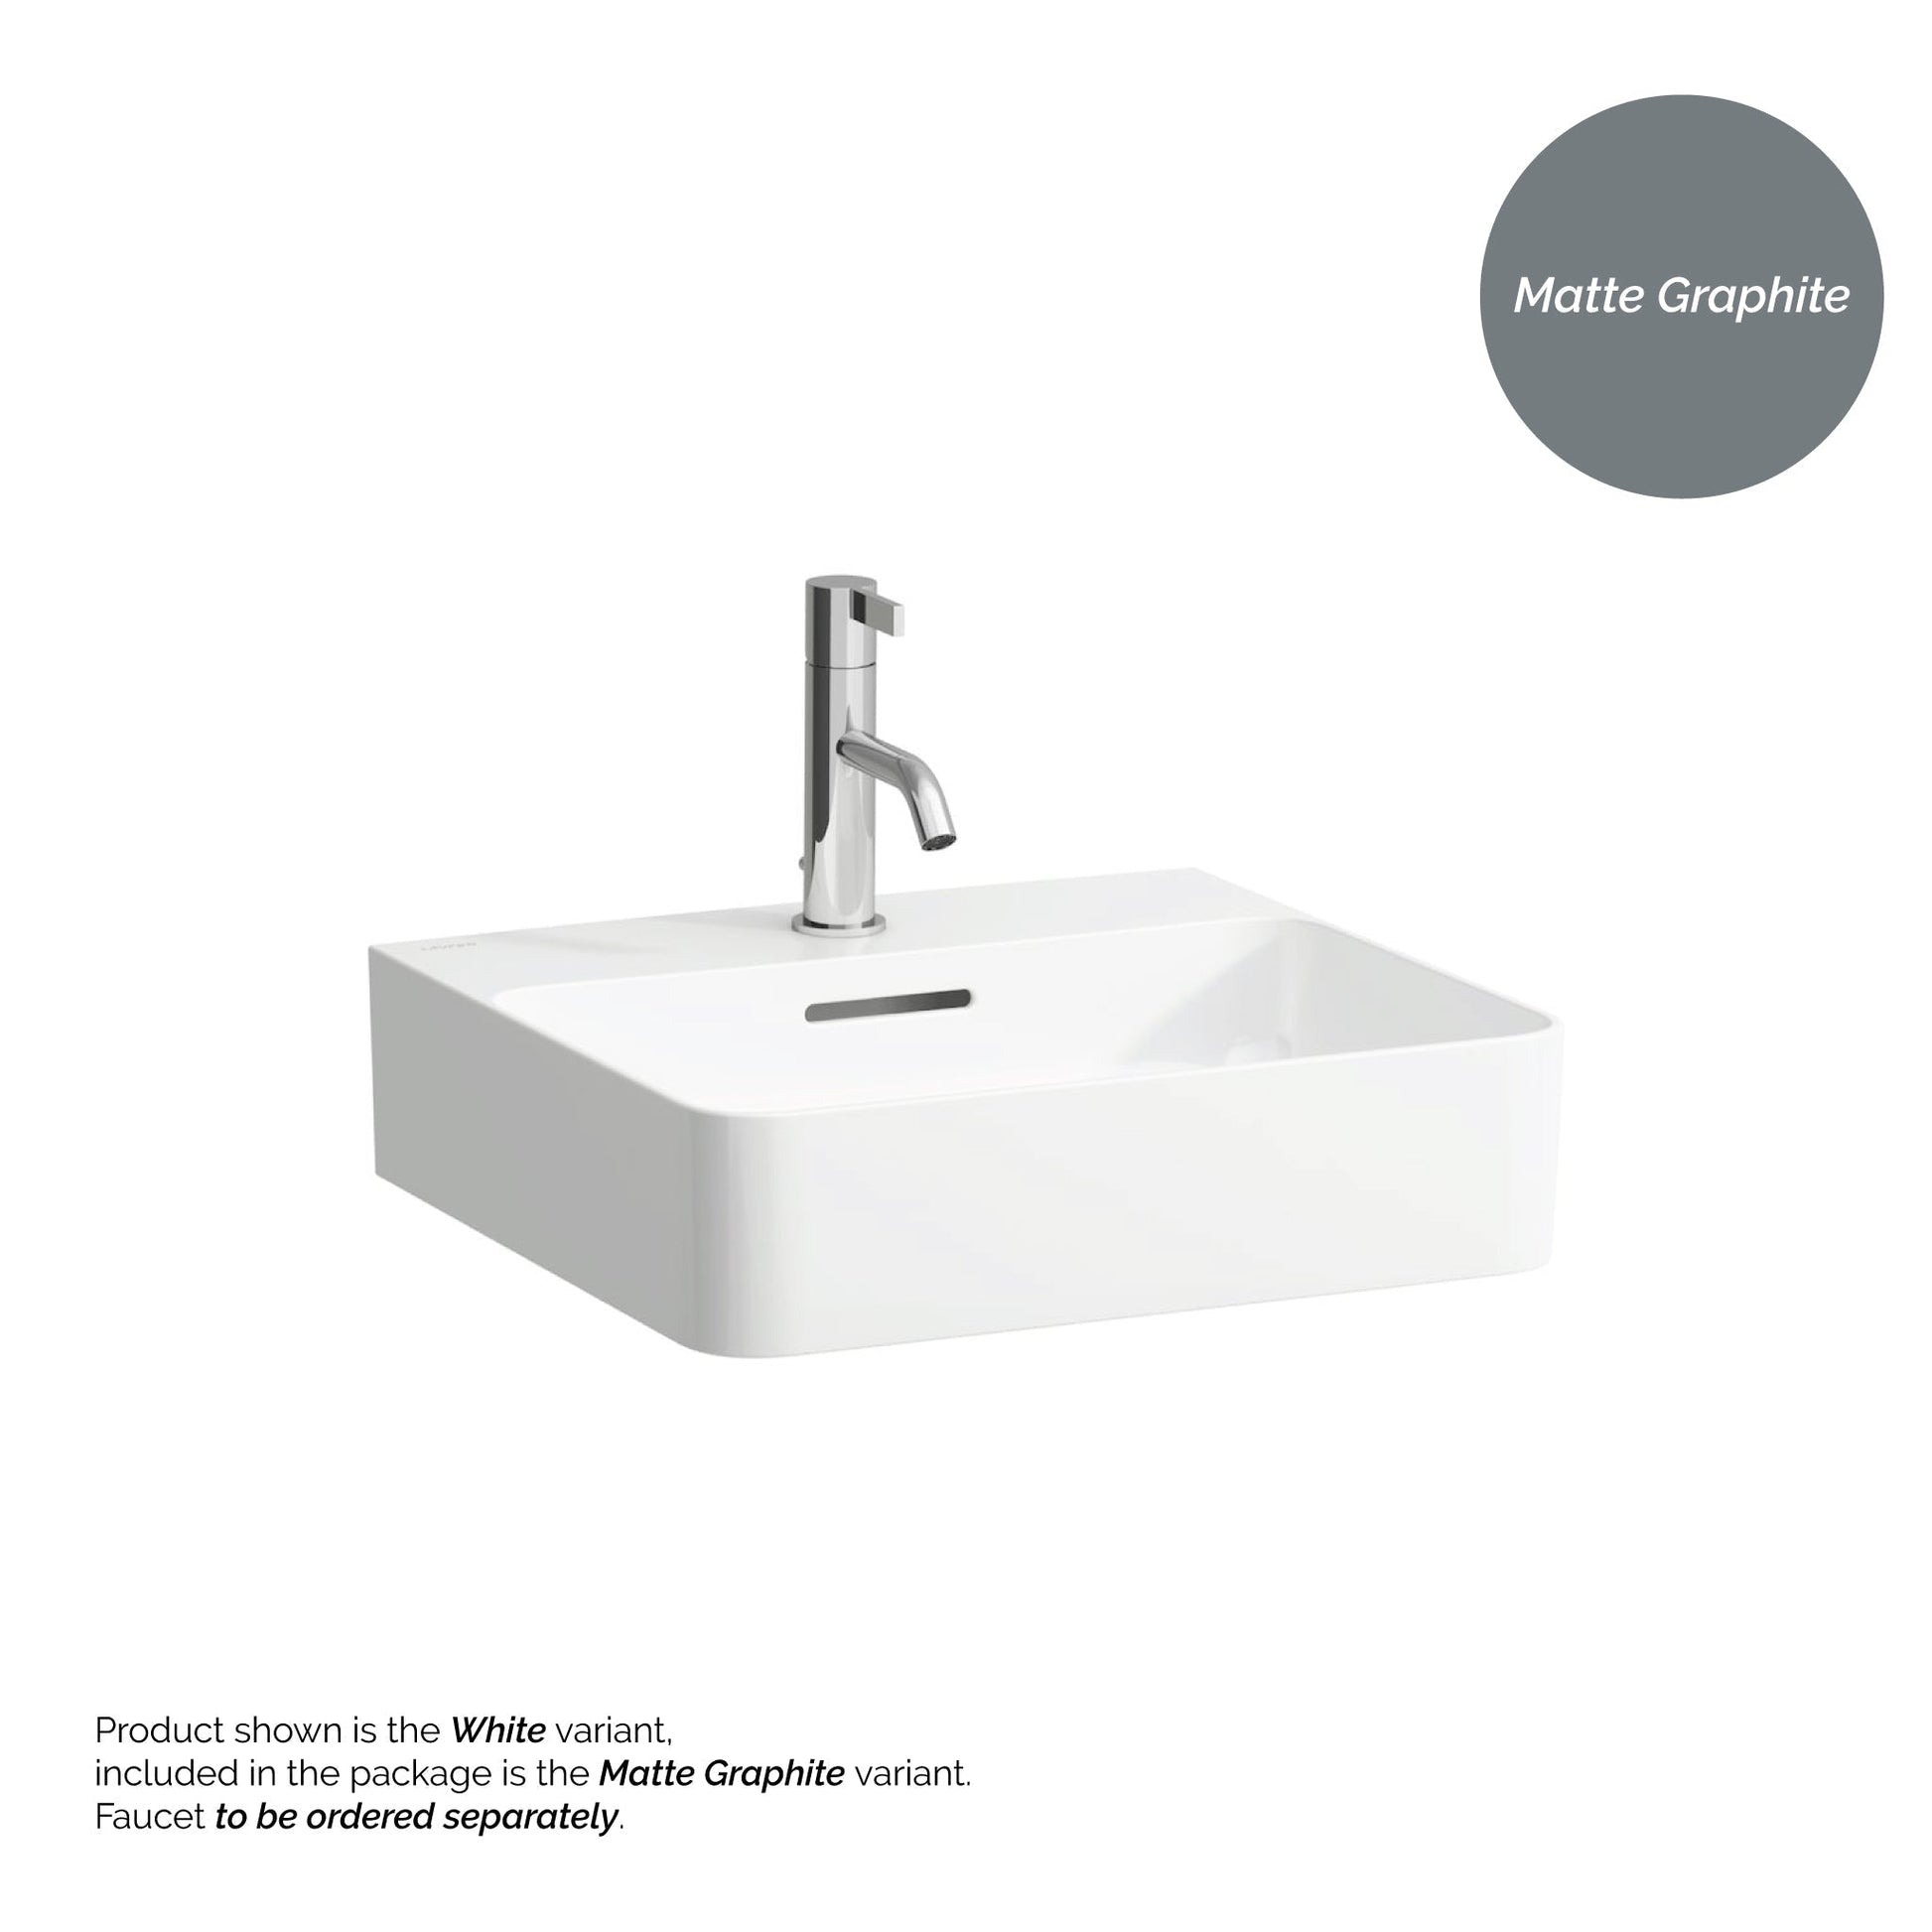 Laufen Val 18" x 17" Rectangular Matte Graphite Ceramic Wall-Mounted Bathroom Sink With Faucet Hole